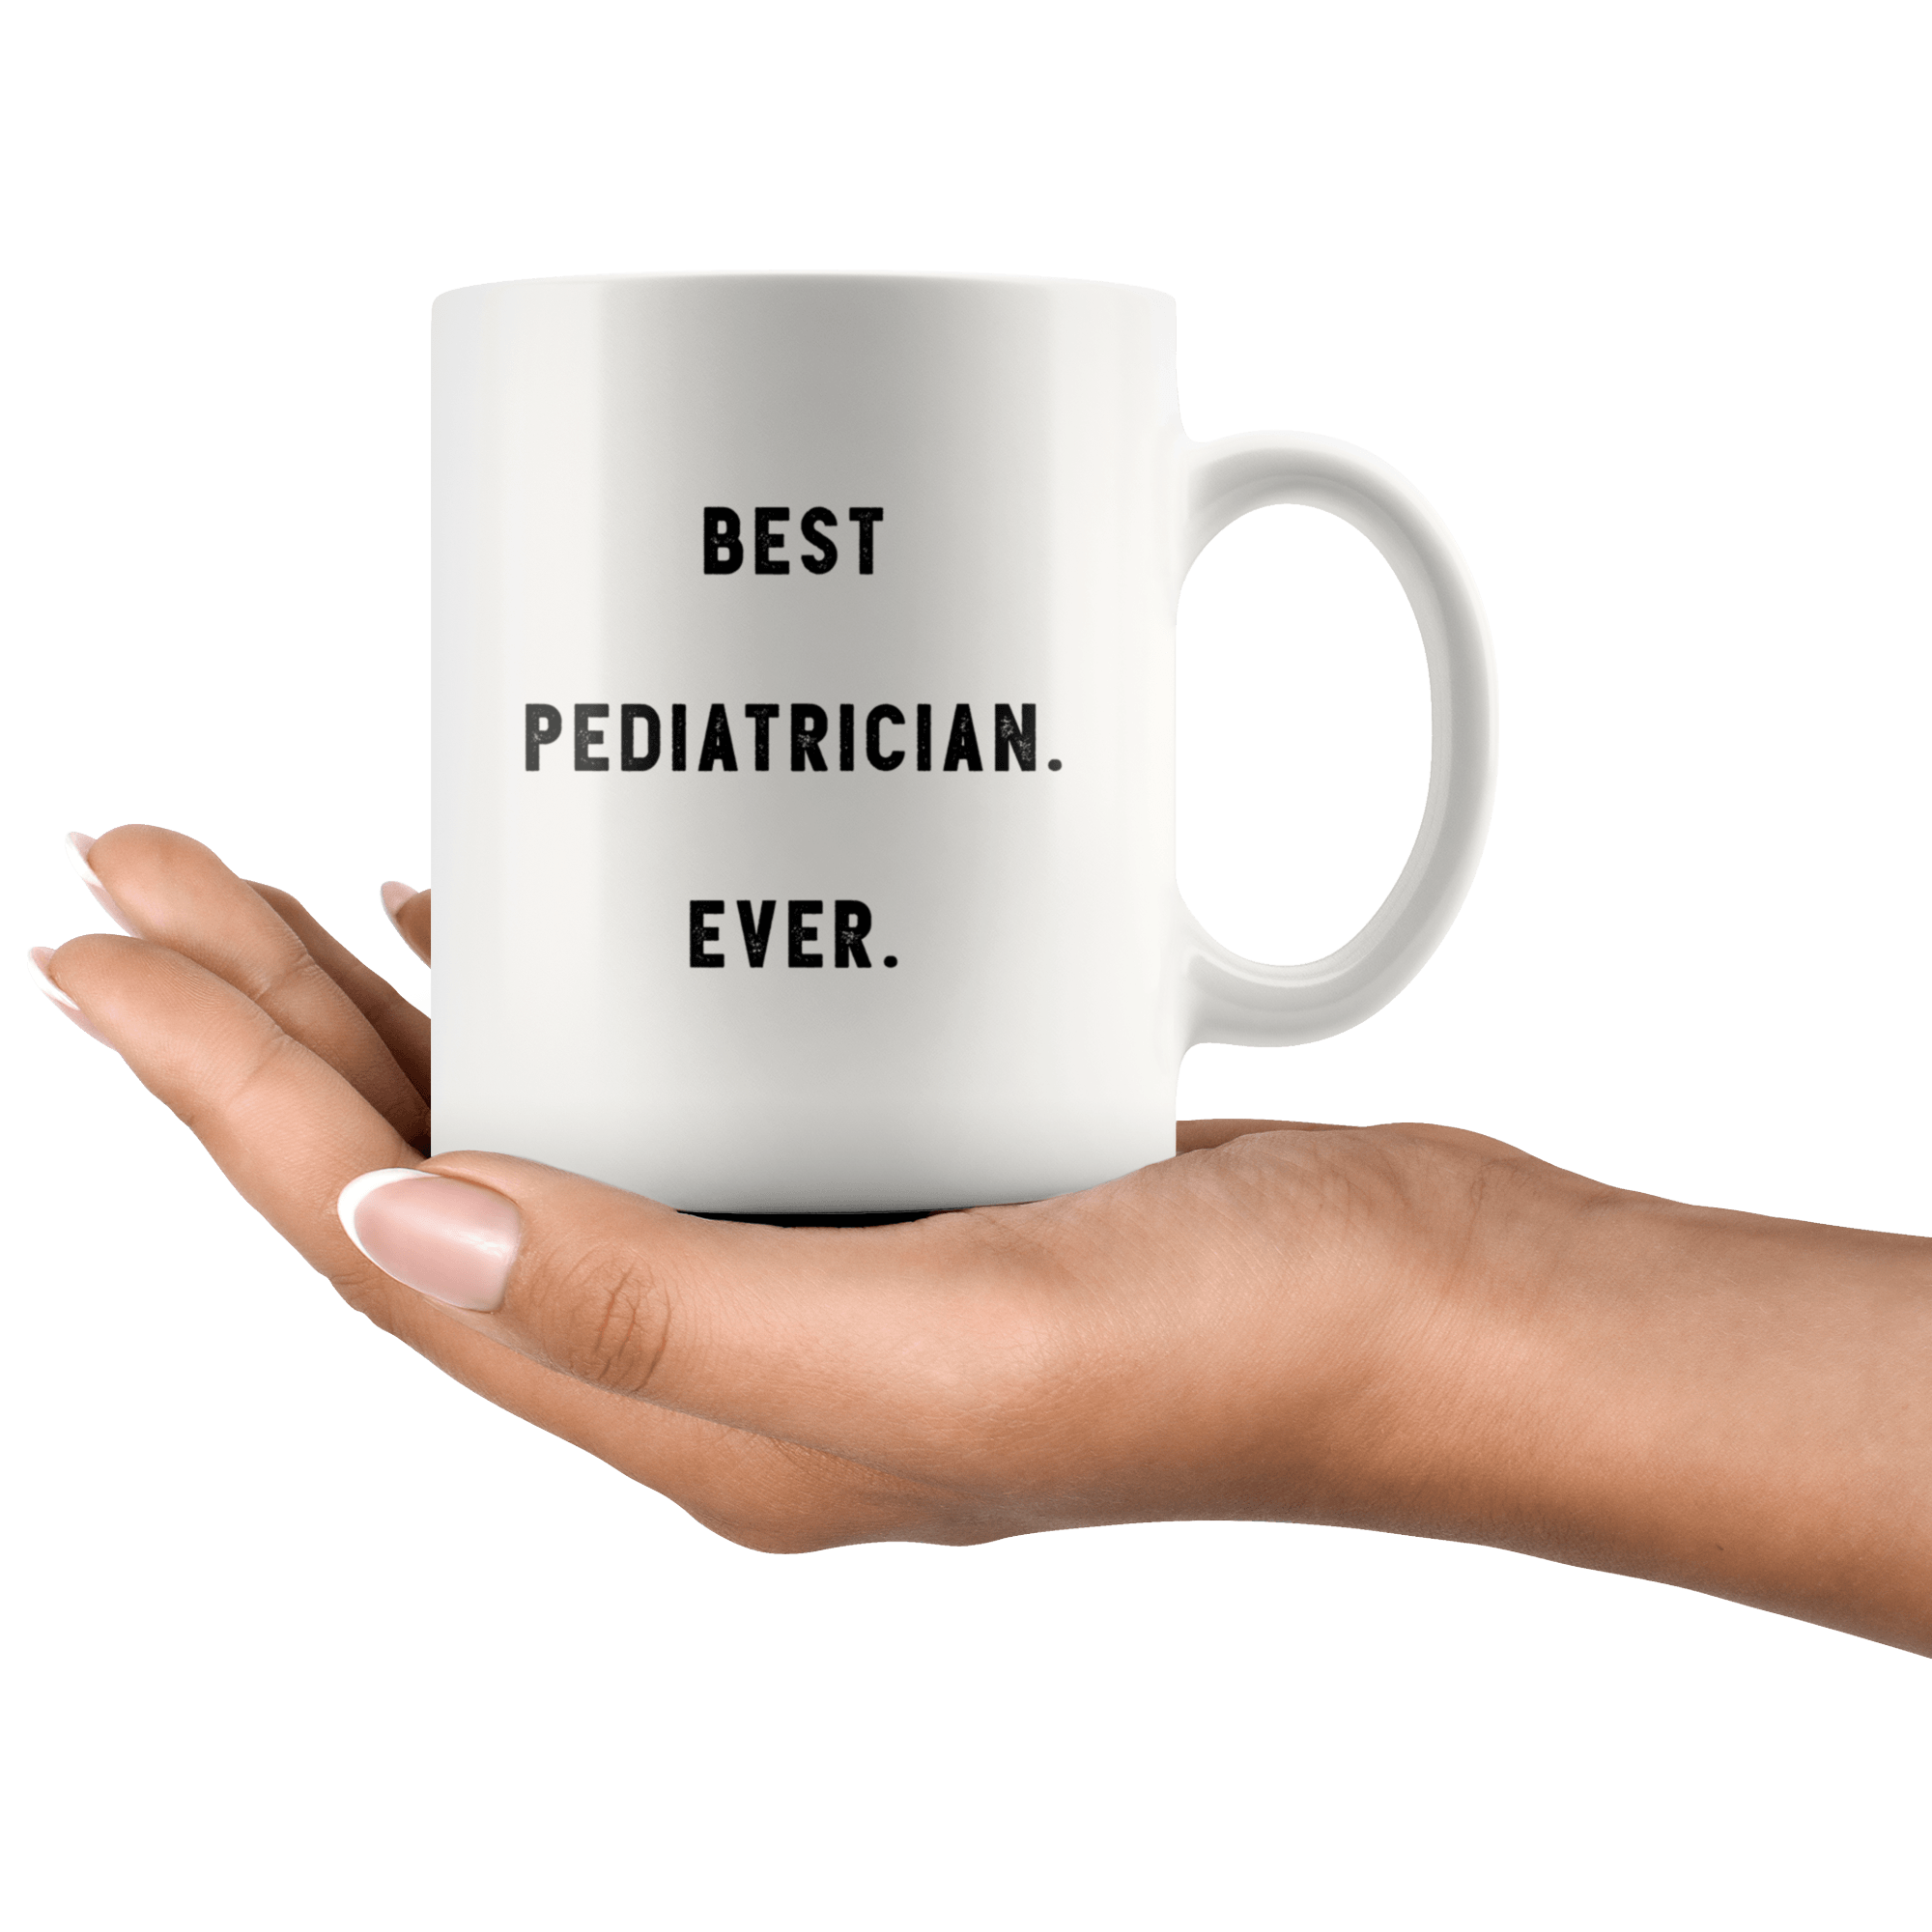 Amazon.com: Pediatrician Gifts For Friends, Keep Calm and Let the  Pediatrician, Fun Pediatrician Two Tone 11oz Mug, Cup From Coworkers, Pediatrician  gifts for baby, Best gifts for pediatricians, Unique : Baby